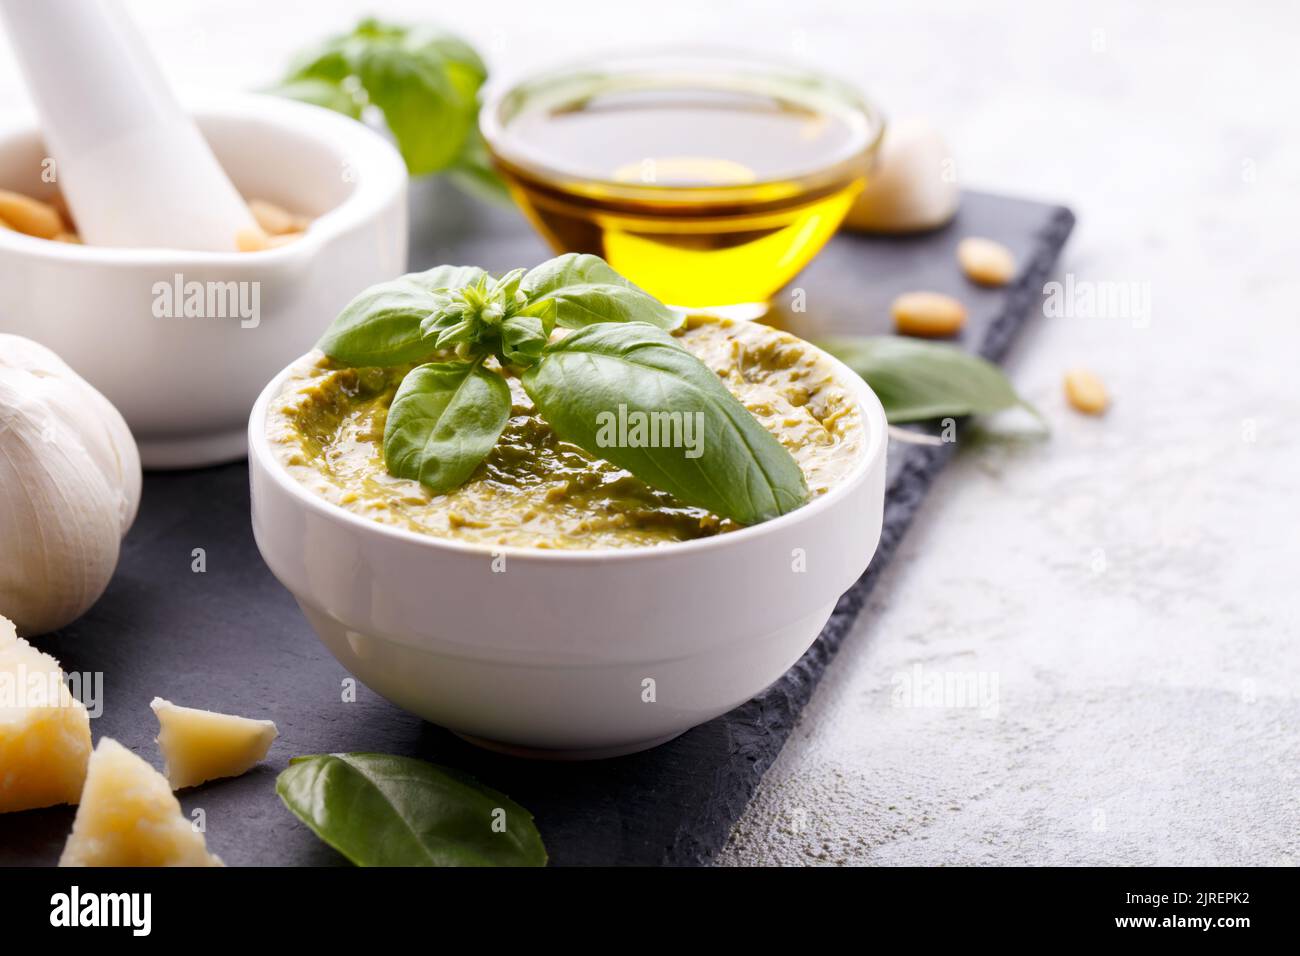 Pesto sauce and ingredients, black cheese board, basil, garlic, pine nuts, olive oil on grey stone background with copy space Stock Photo